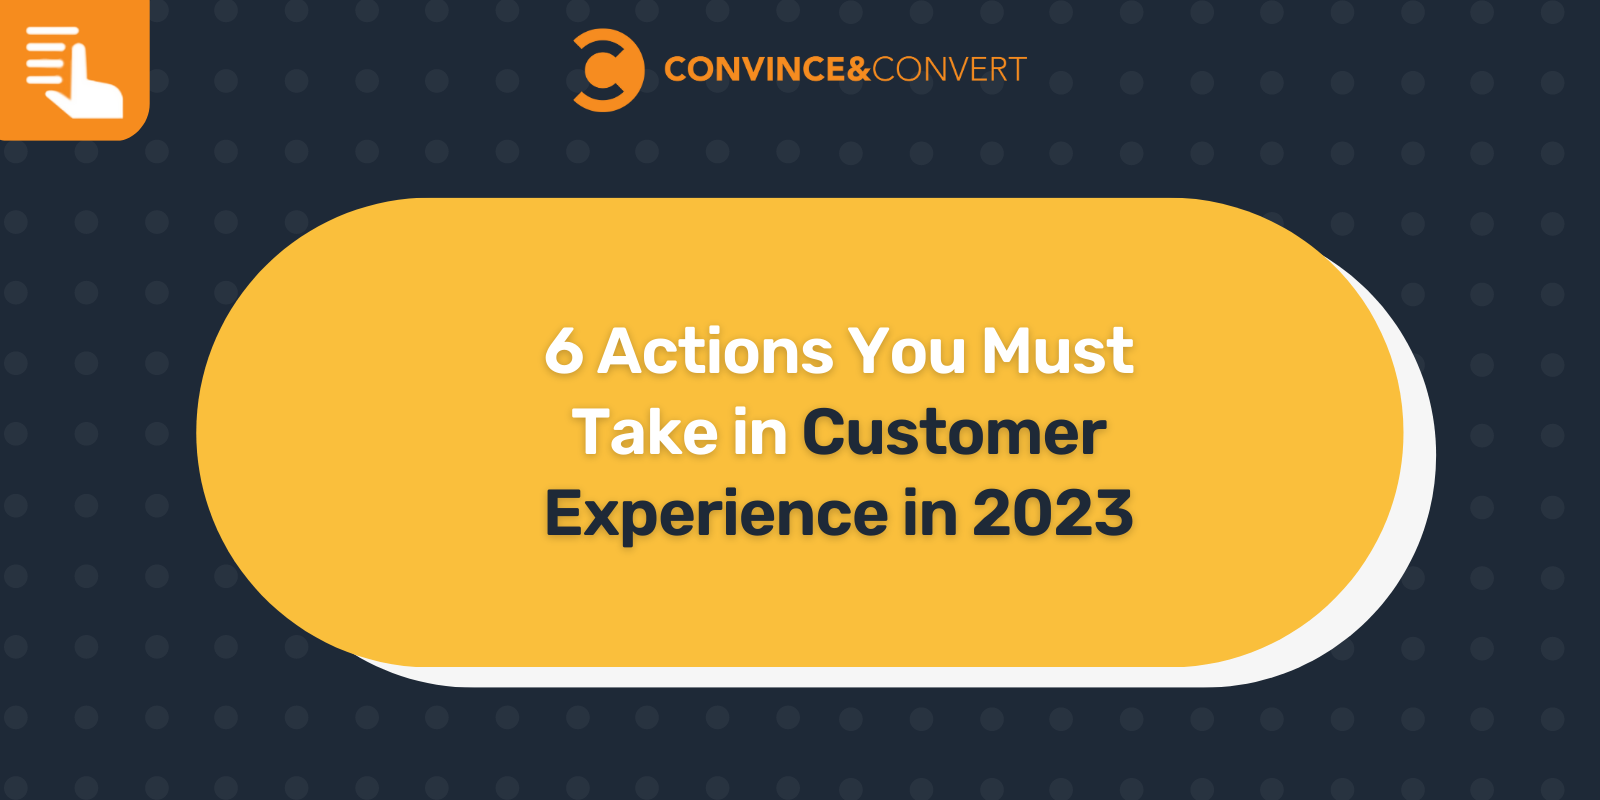 6 Actions You Must Take in Customer Experience in 2023